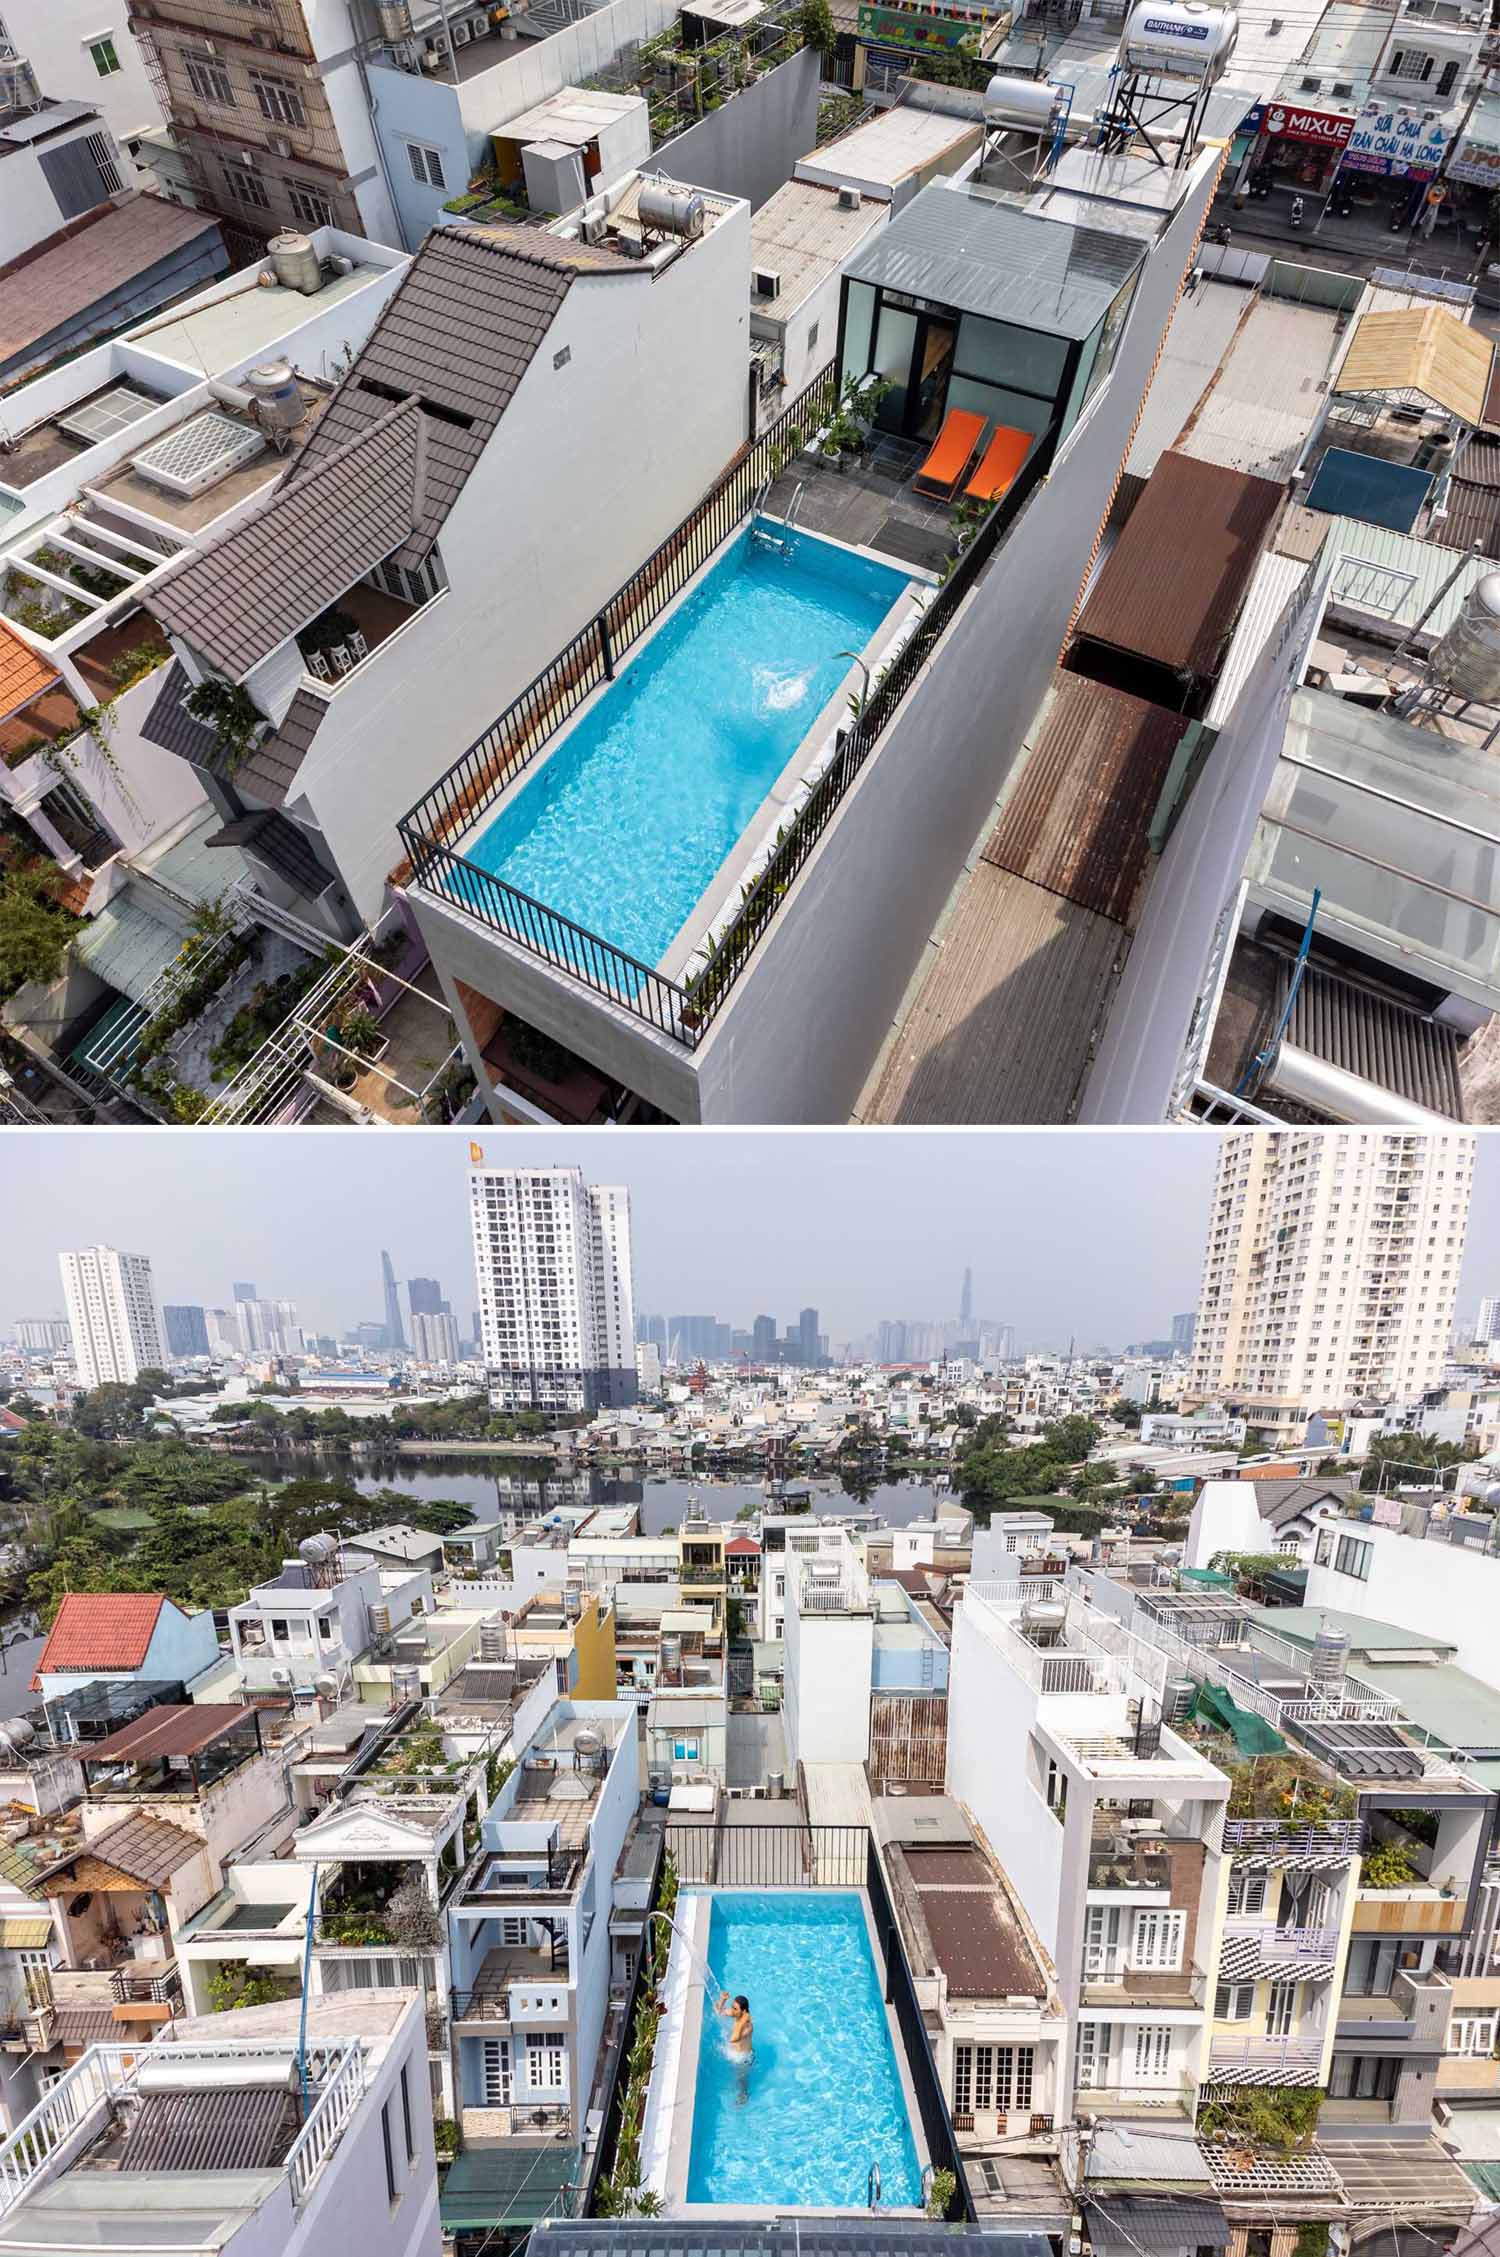 The rooftop terrace of this tall and skinny home, is equipped with a laundry area and a small swimming pool with views of the city center.